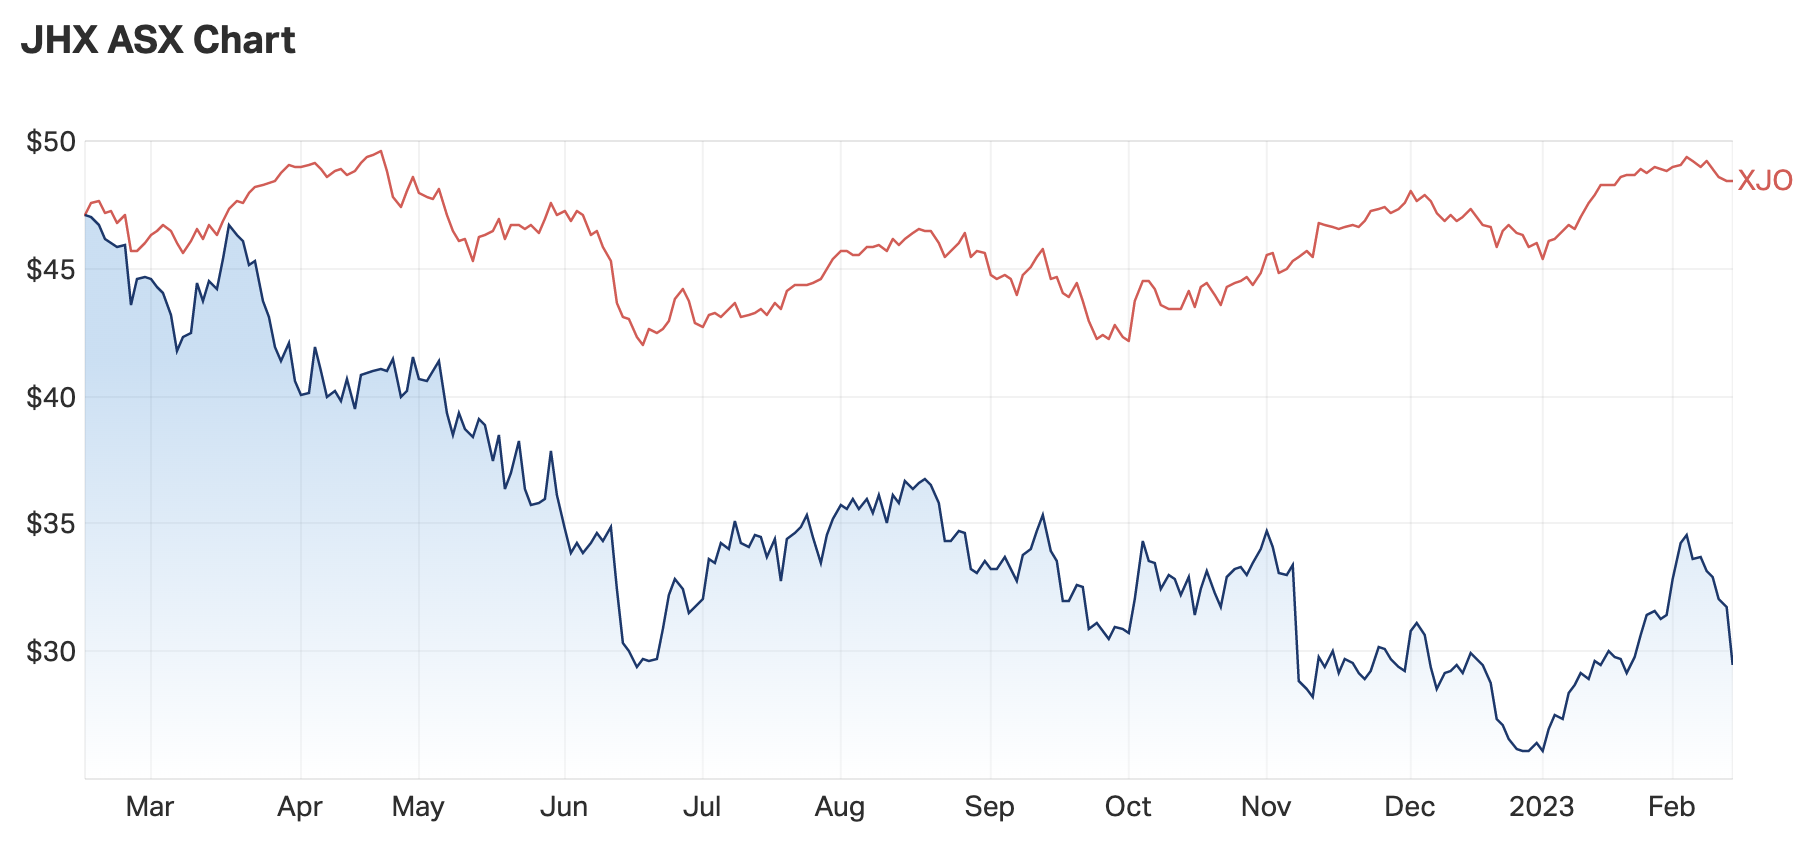 JHX performance over the past year against the ASX200. Source: Market Index